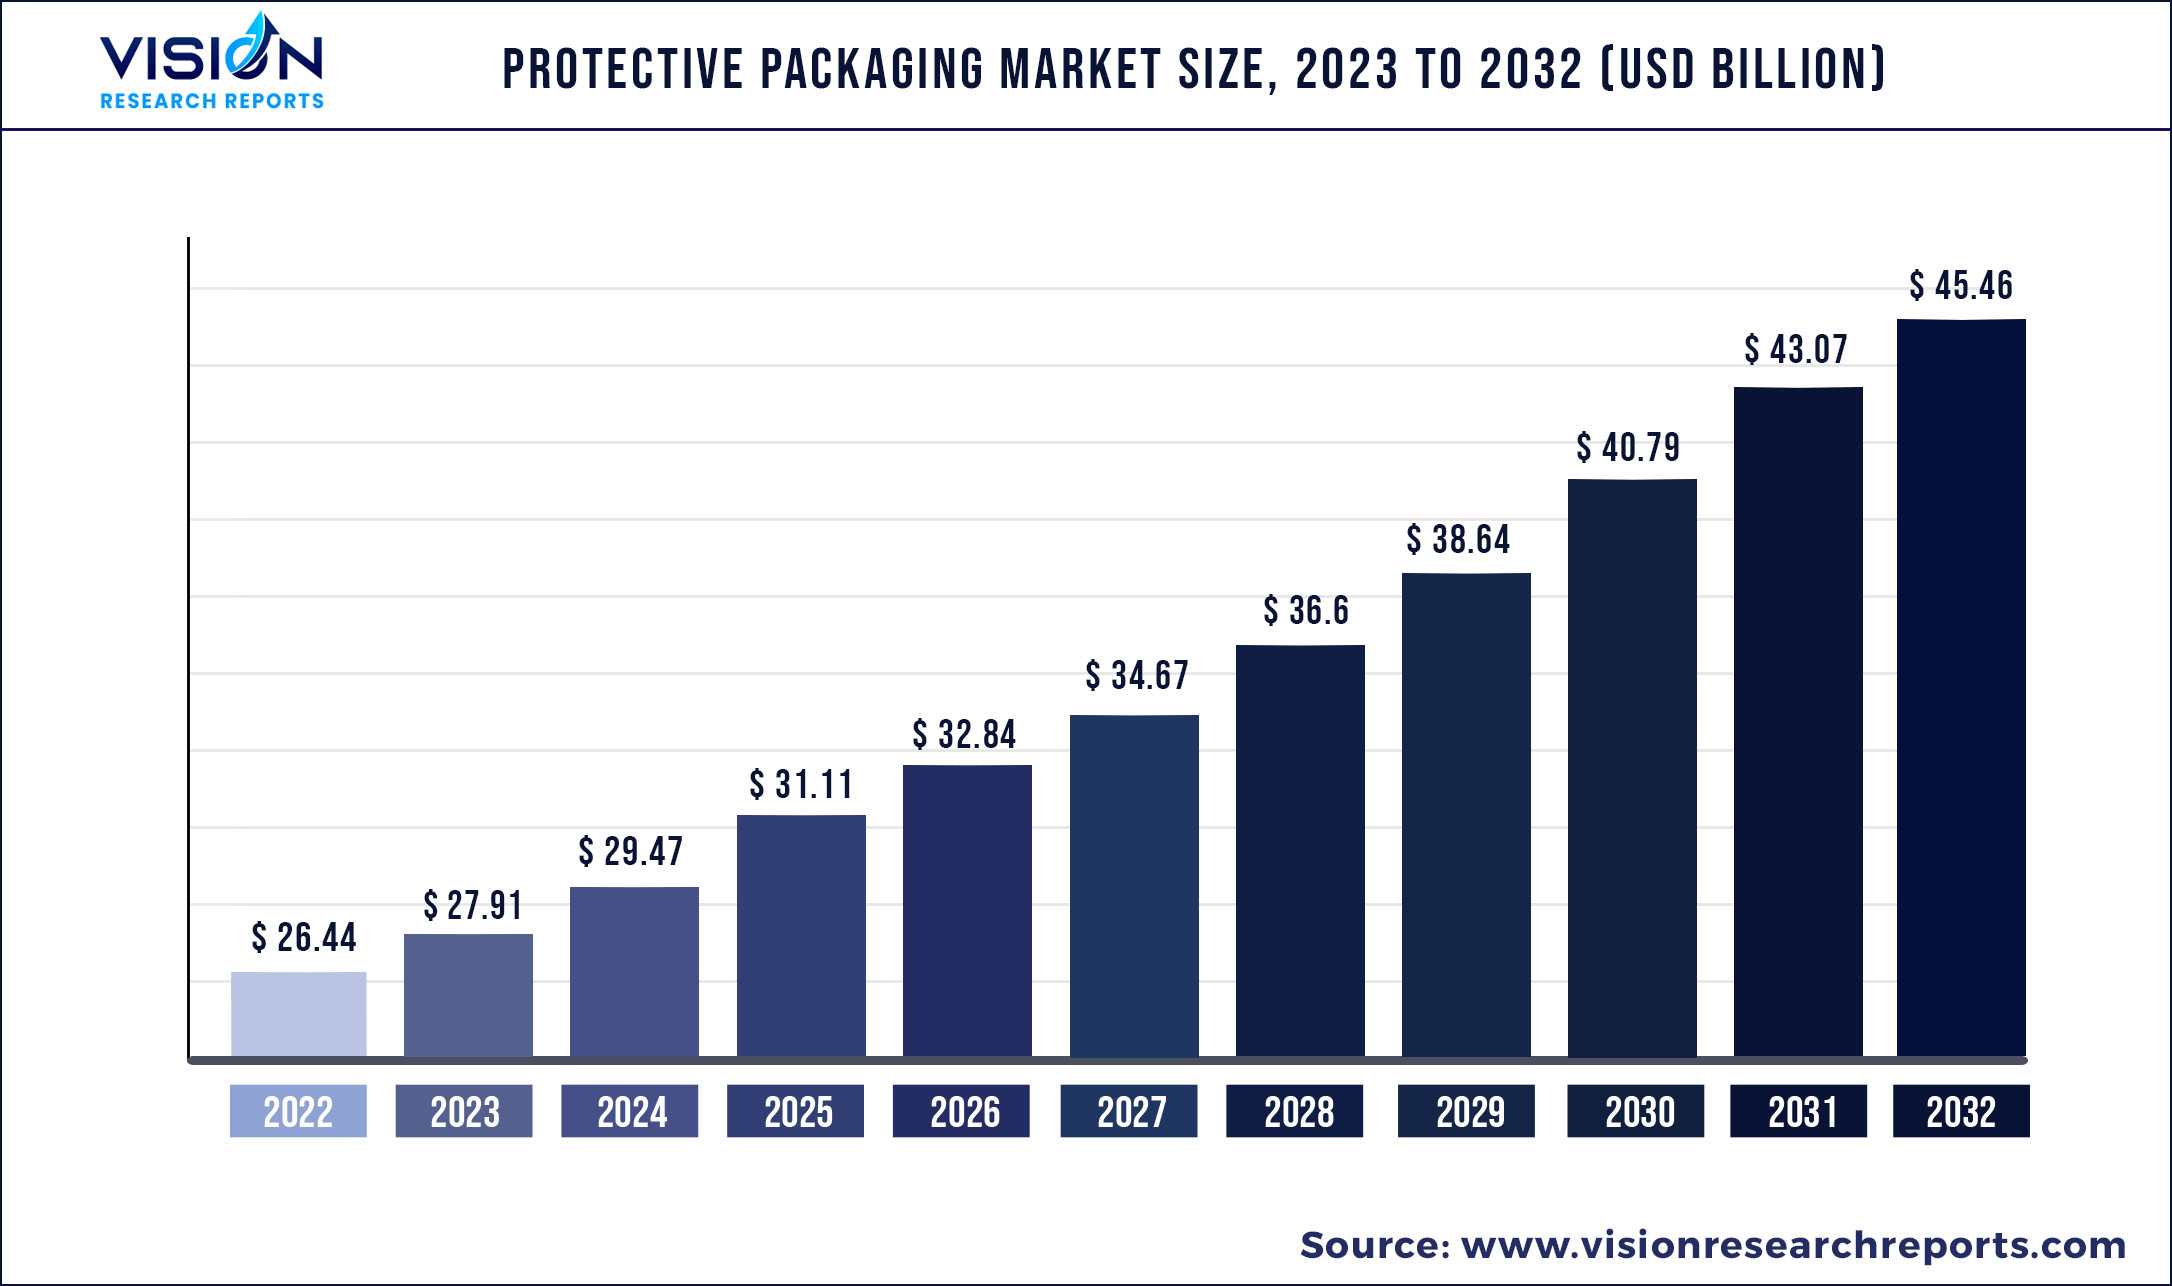 Protective Packaging Market Size 2023 to 2032